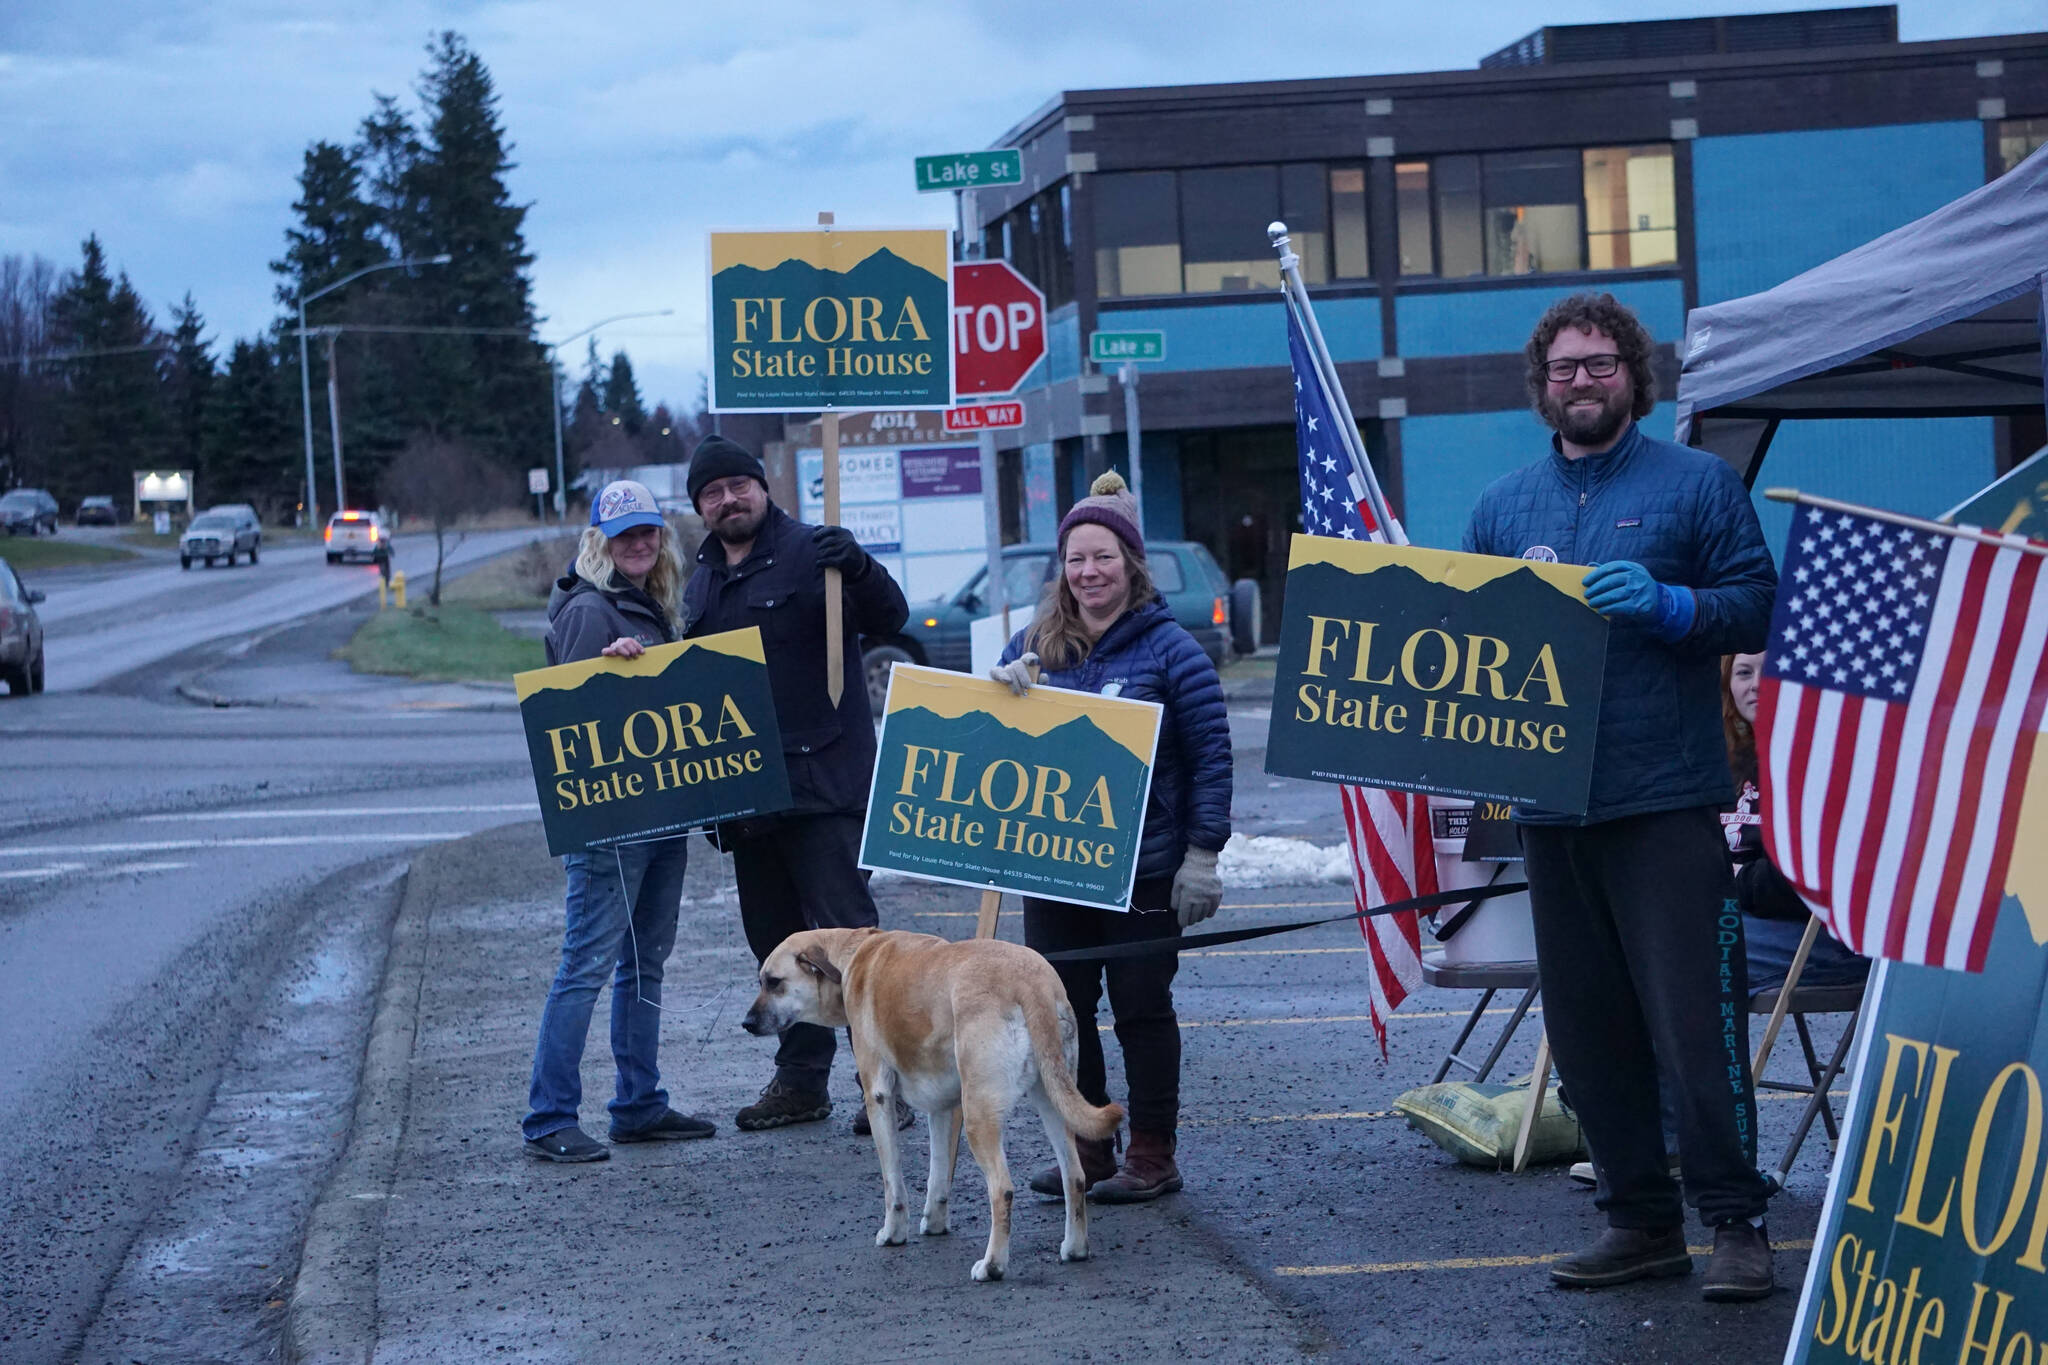 Friends and family of Louie Flora wave signs in support of the candidate for District 6 State House Representative on Tuesday, Nov. 8, 2022, on Pioneer Avenue in Homer, Alaska. From left to right are Chelsea Jones, Jon Flora, Sandy the dog, Sarah Banks and Mikee Flora. Louie Flora’s children Sidney and Rocco are in the tent to the right. (Photo by Michael Armstrong/Homer News)
Friends and family of Louie Flora wave signs in support of the candidate for District 6 State House Representative on Tuesday, Nov. 8, 2022, on Pioneer Avenue in Homer, Alaska. From left to right are Chelsea Jones, Jon Flora, Sandy the dog, Sarah Banks and Mikee Flora. Louie Flora’s children Sidney and Rocco are in the tent to the right. (Photo by Michael Armstrong/Homer News)